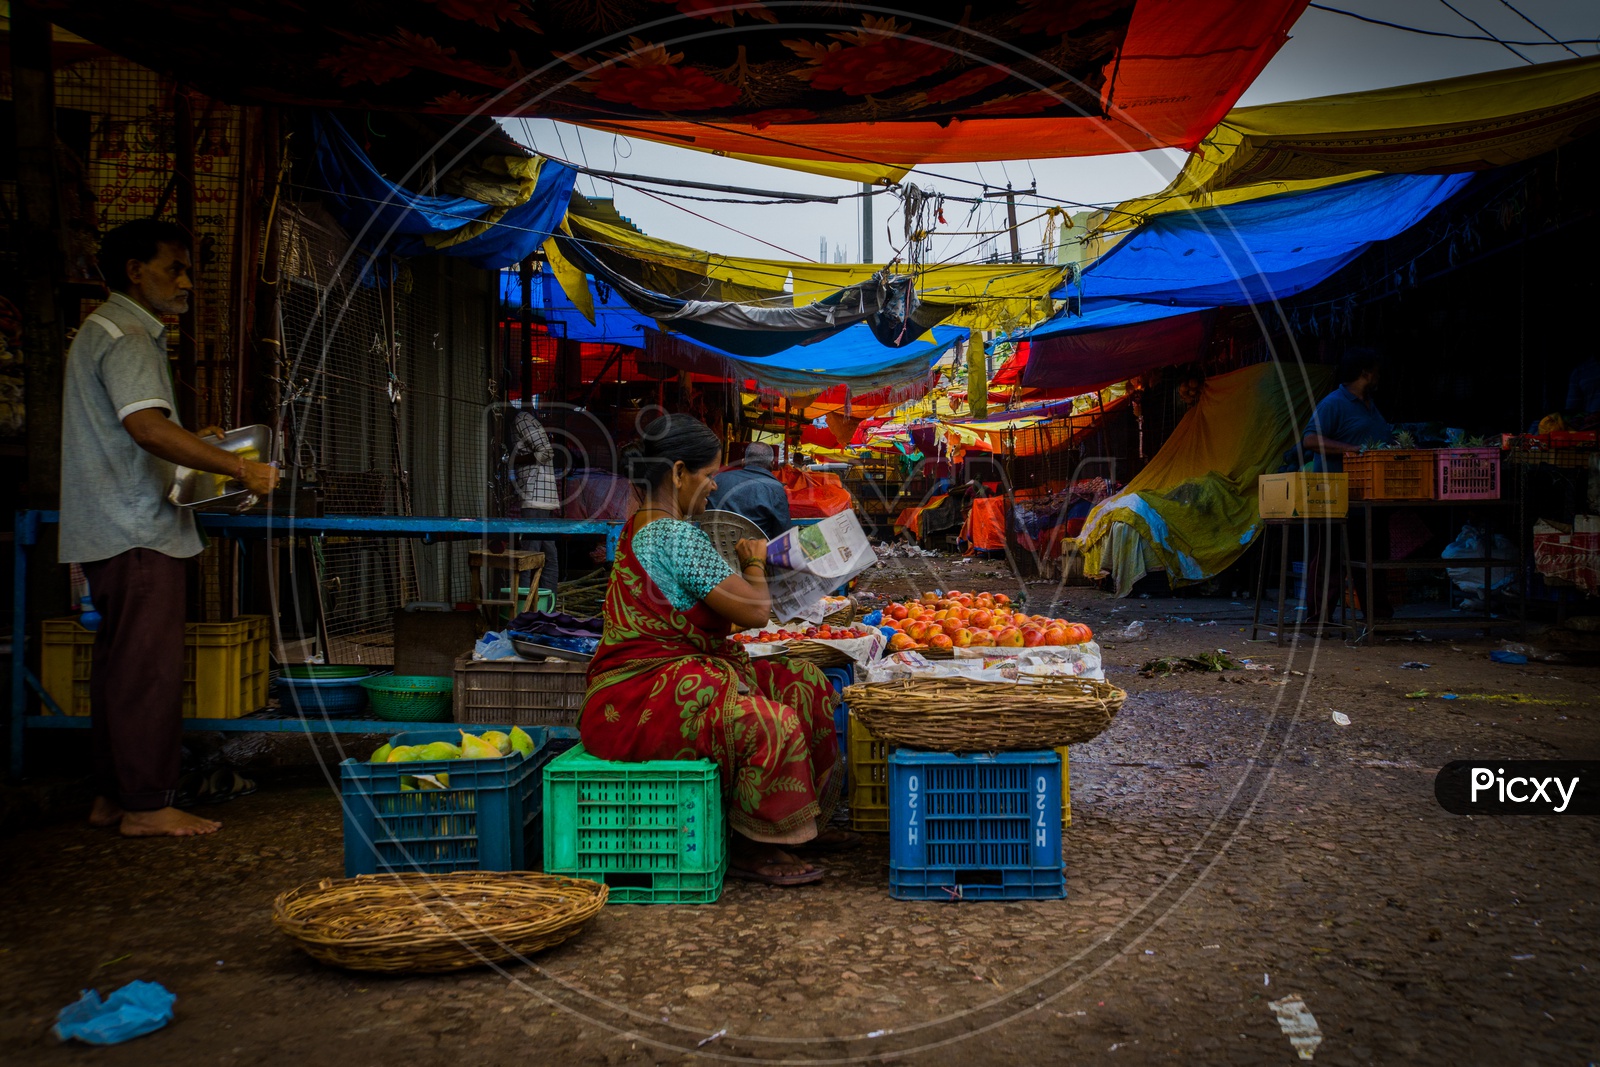 Picture of vegetable vendor setting up her stall in a vegetable market.